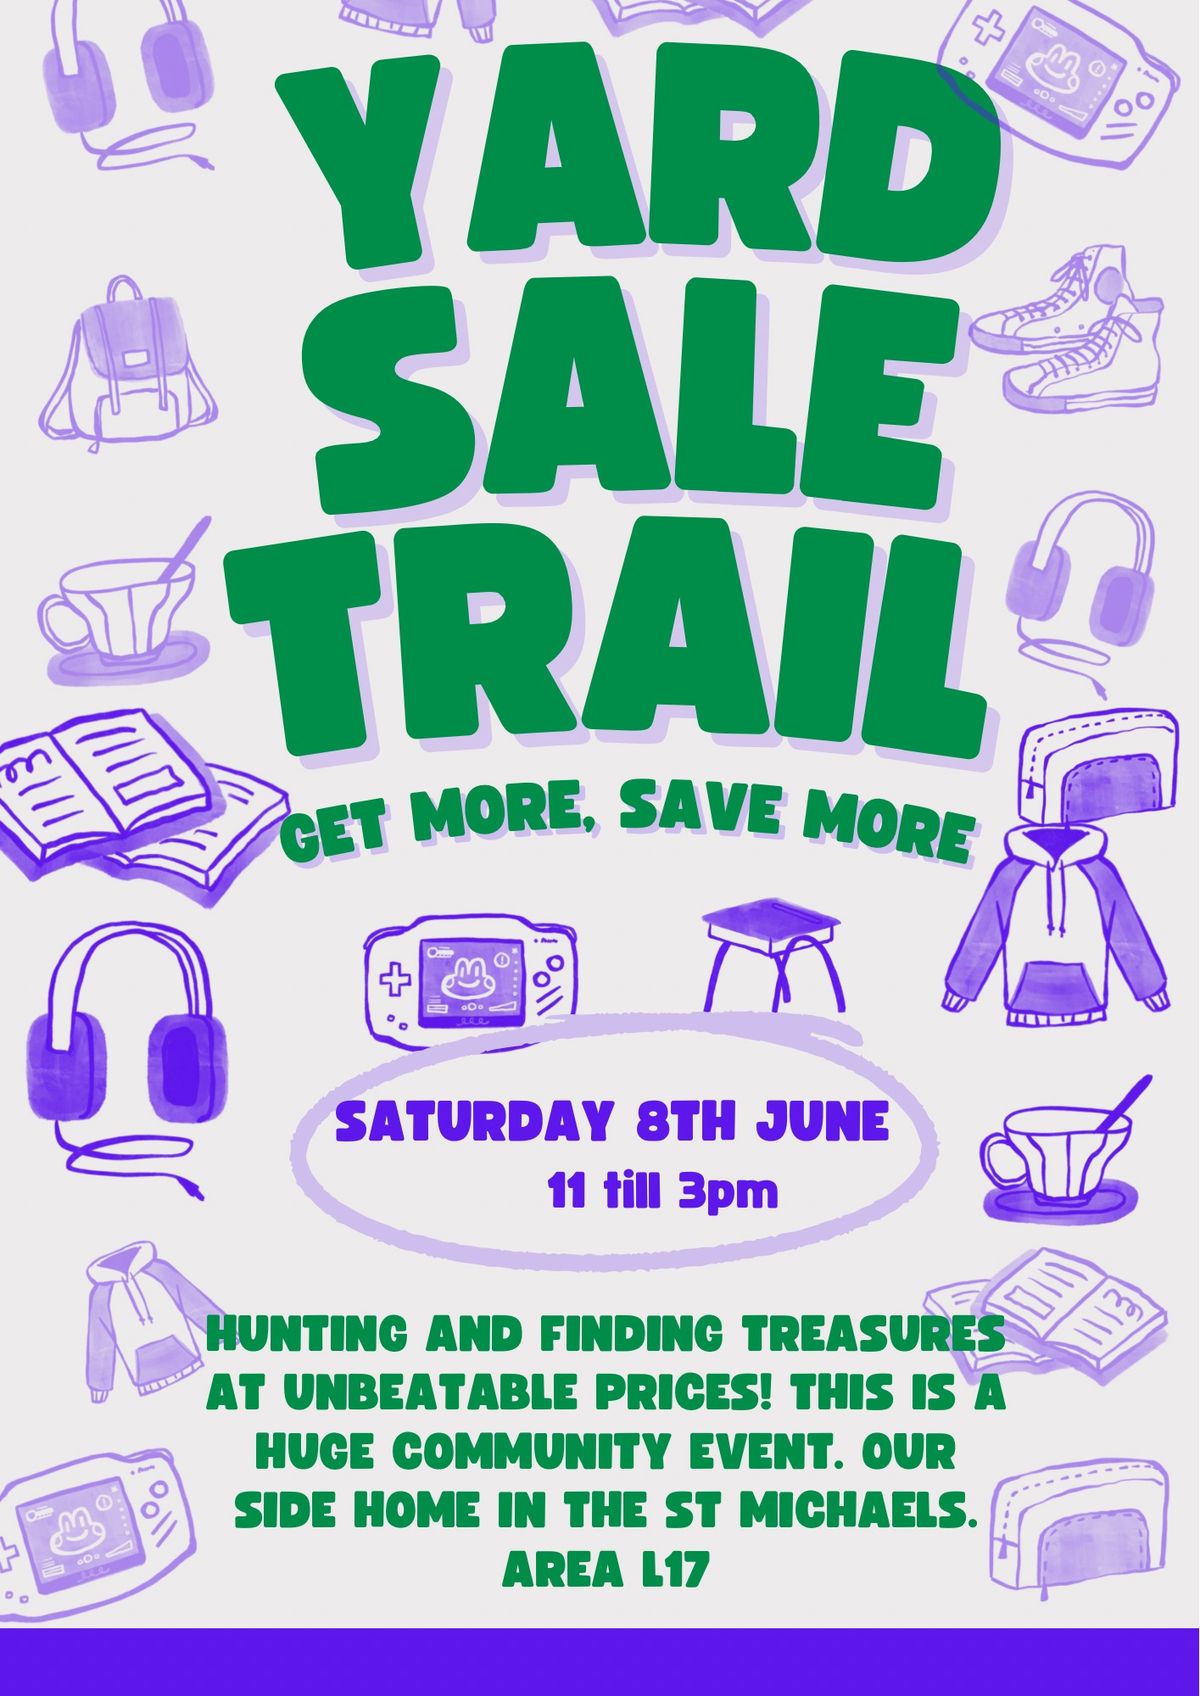 Yard sale trail indoor and out door market.